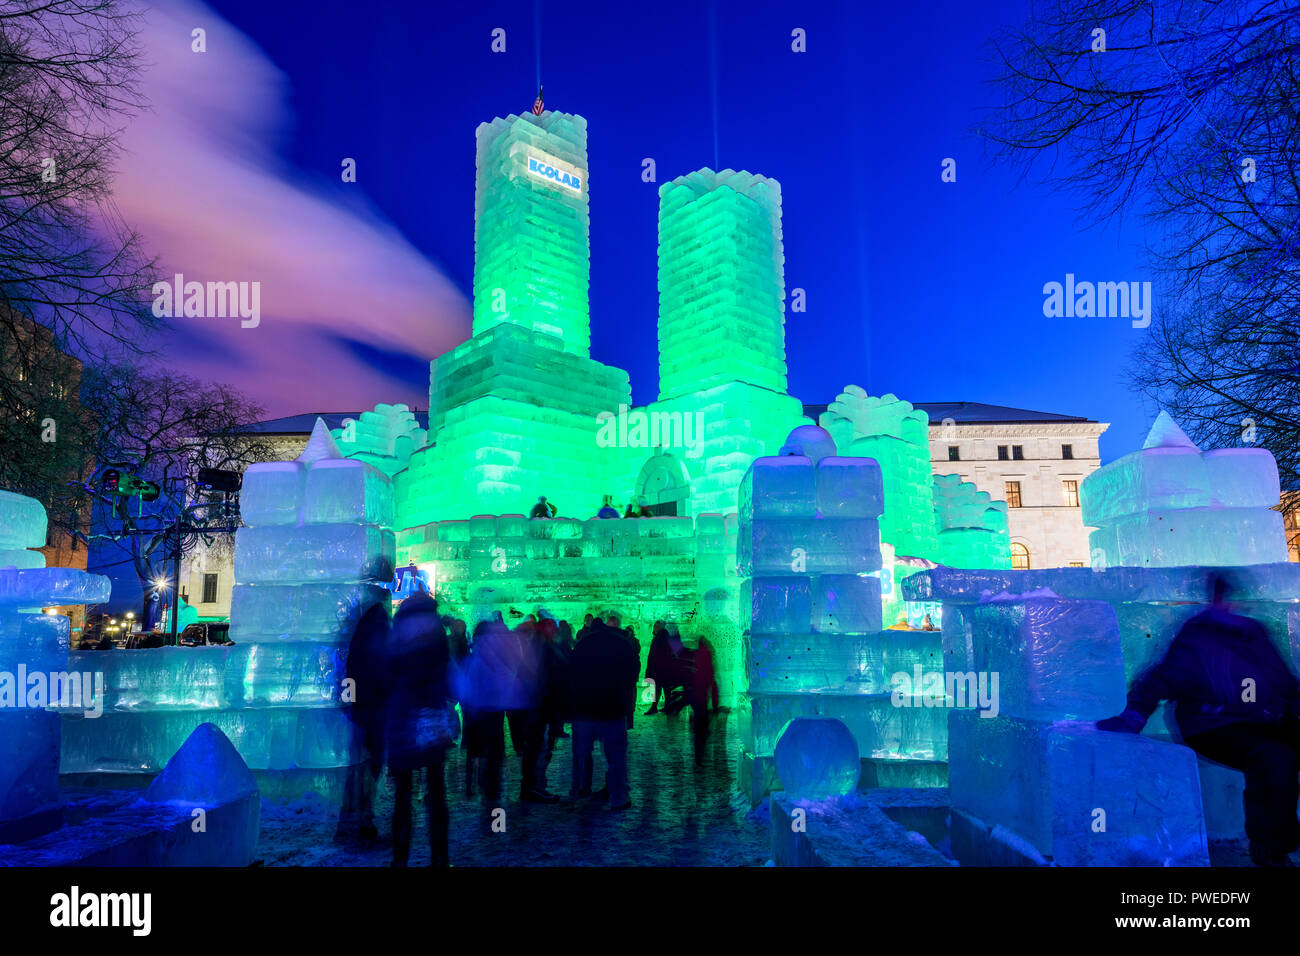 2018 Saint Paul Winter Carnival Ice Palace with green lighting. The ice palace was built in Rice Park downtown St. Paul, Minnesota. Stock Photo